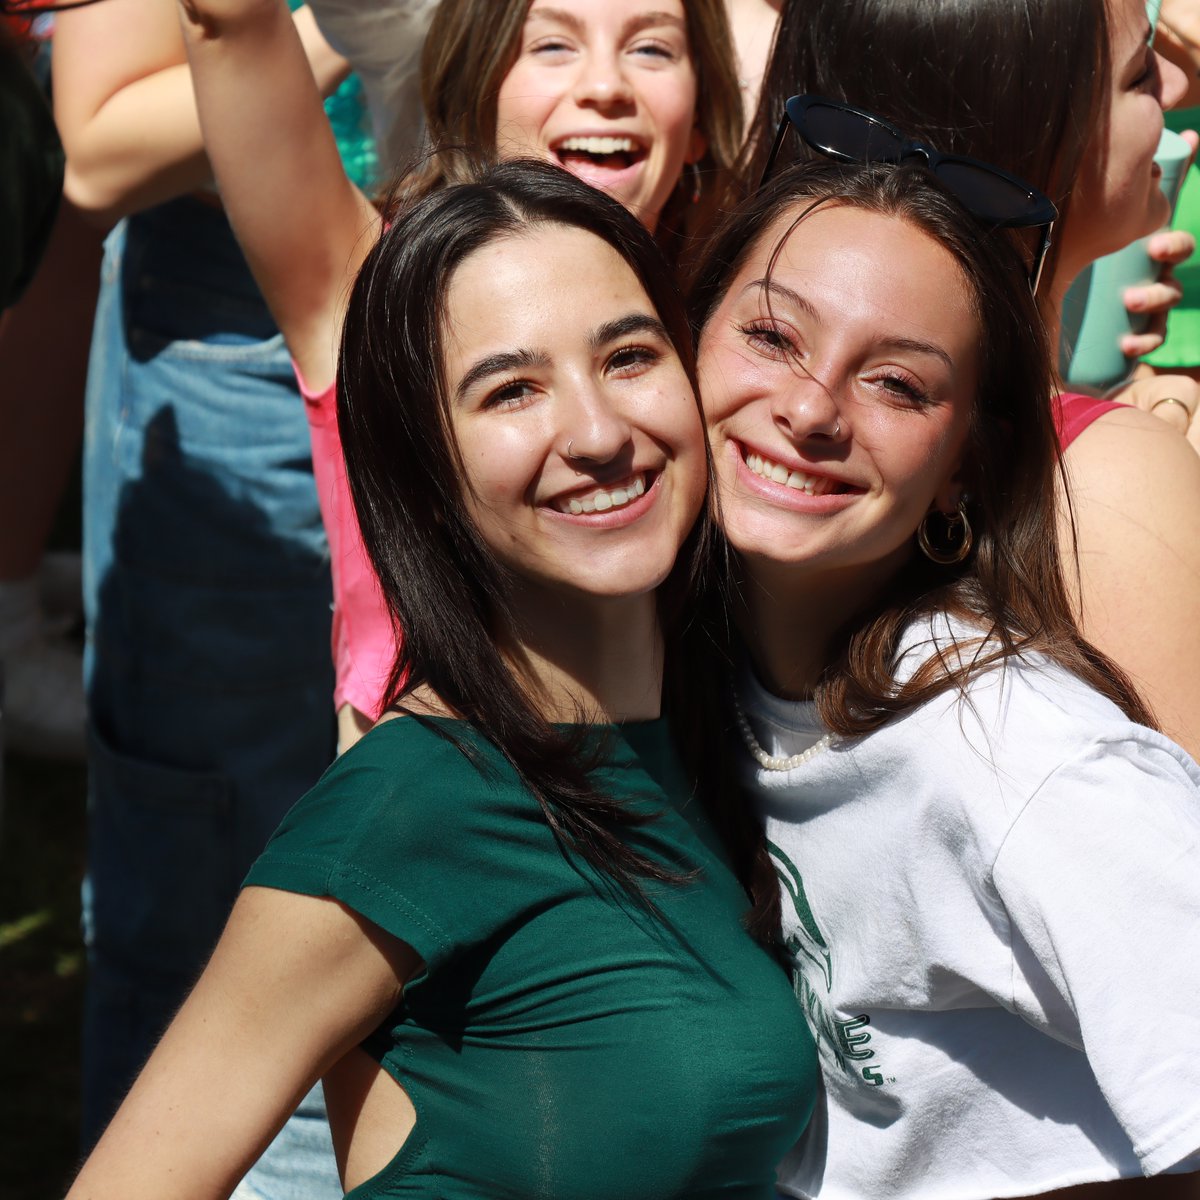 'Here at Le Moyne, you can expect a visit that you won’t forget & you’ll have so many people offering to help you along on your journey.' See first-year, transfer & graduate students opportunities. Plan your visit today! cstu.io/8ea566